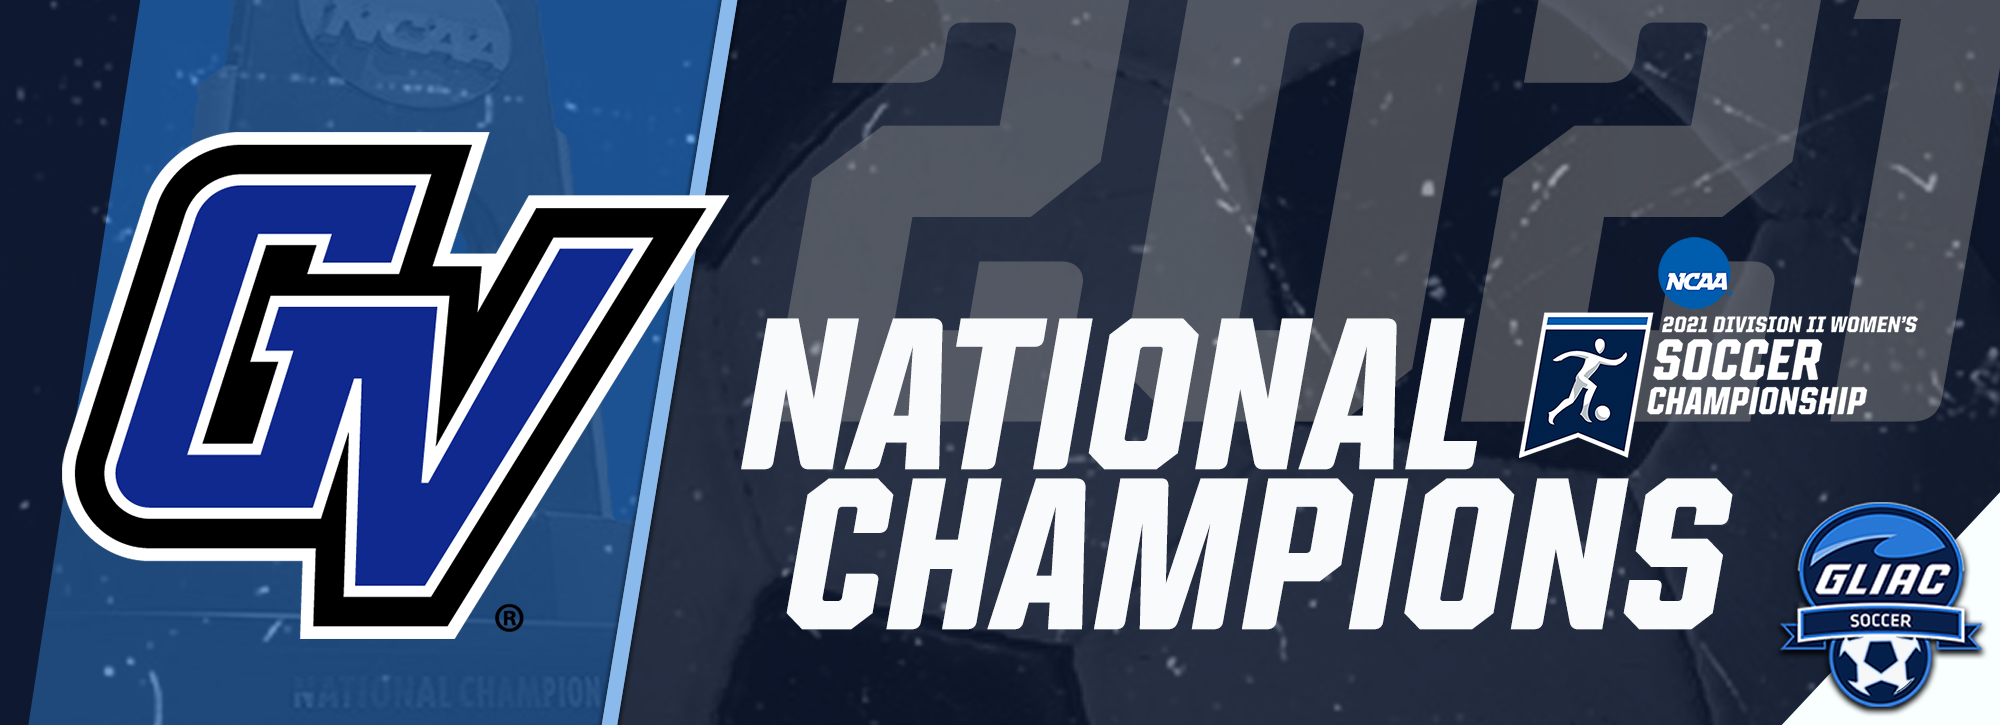 Grand Valley State women's soccer captures national championship